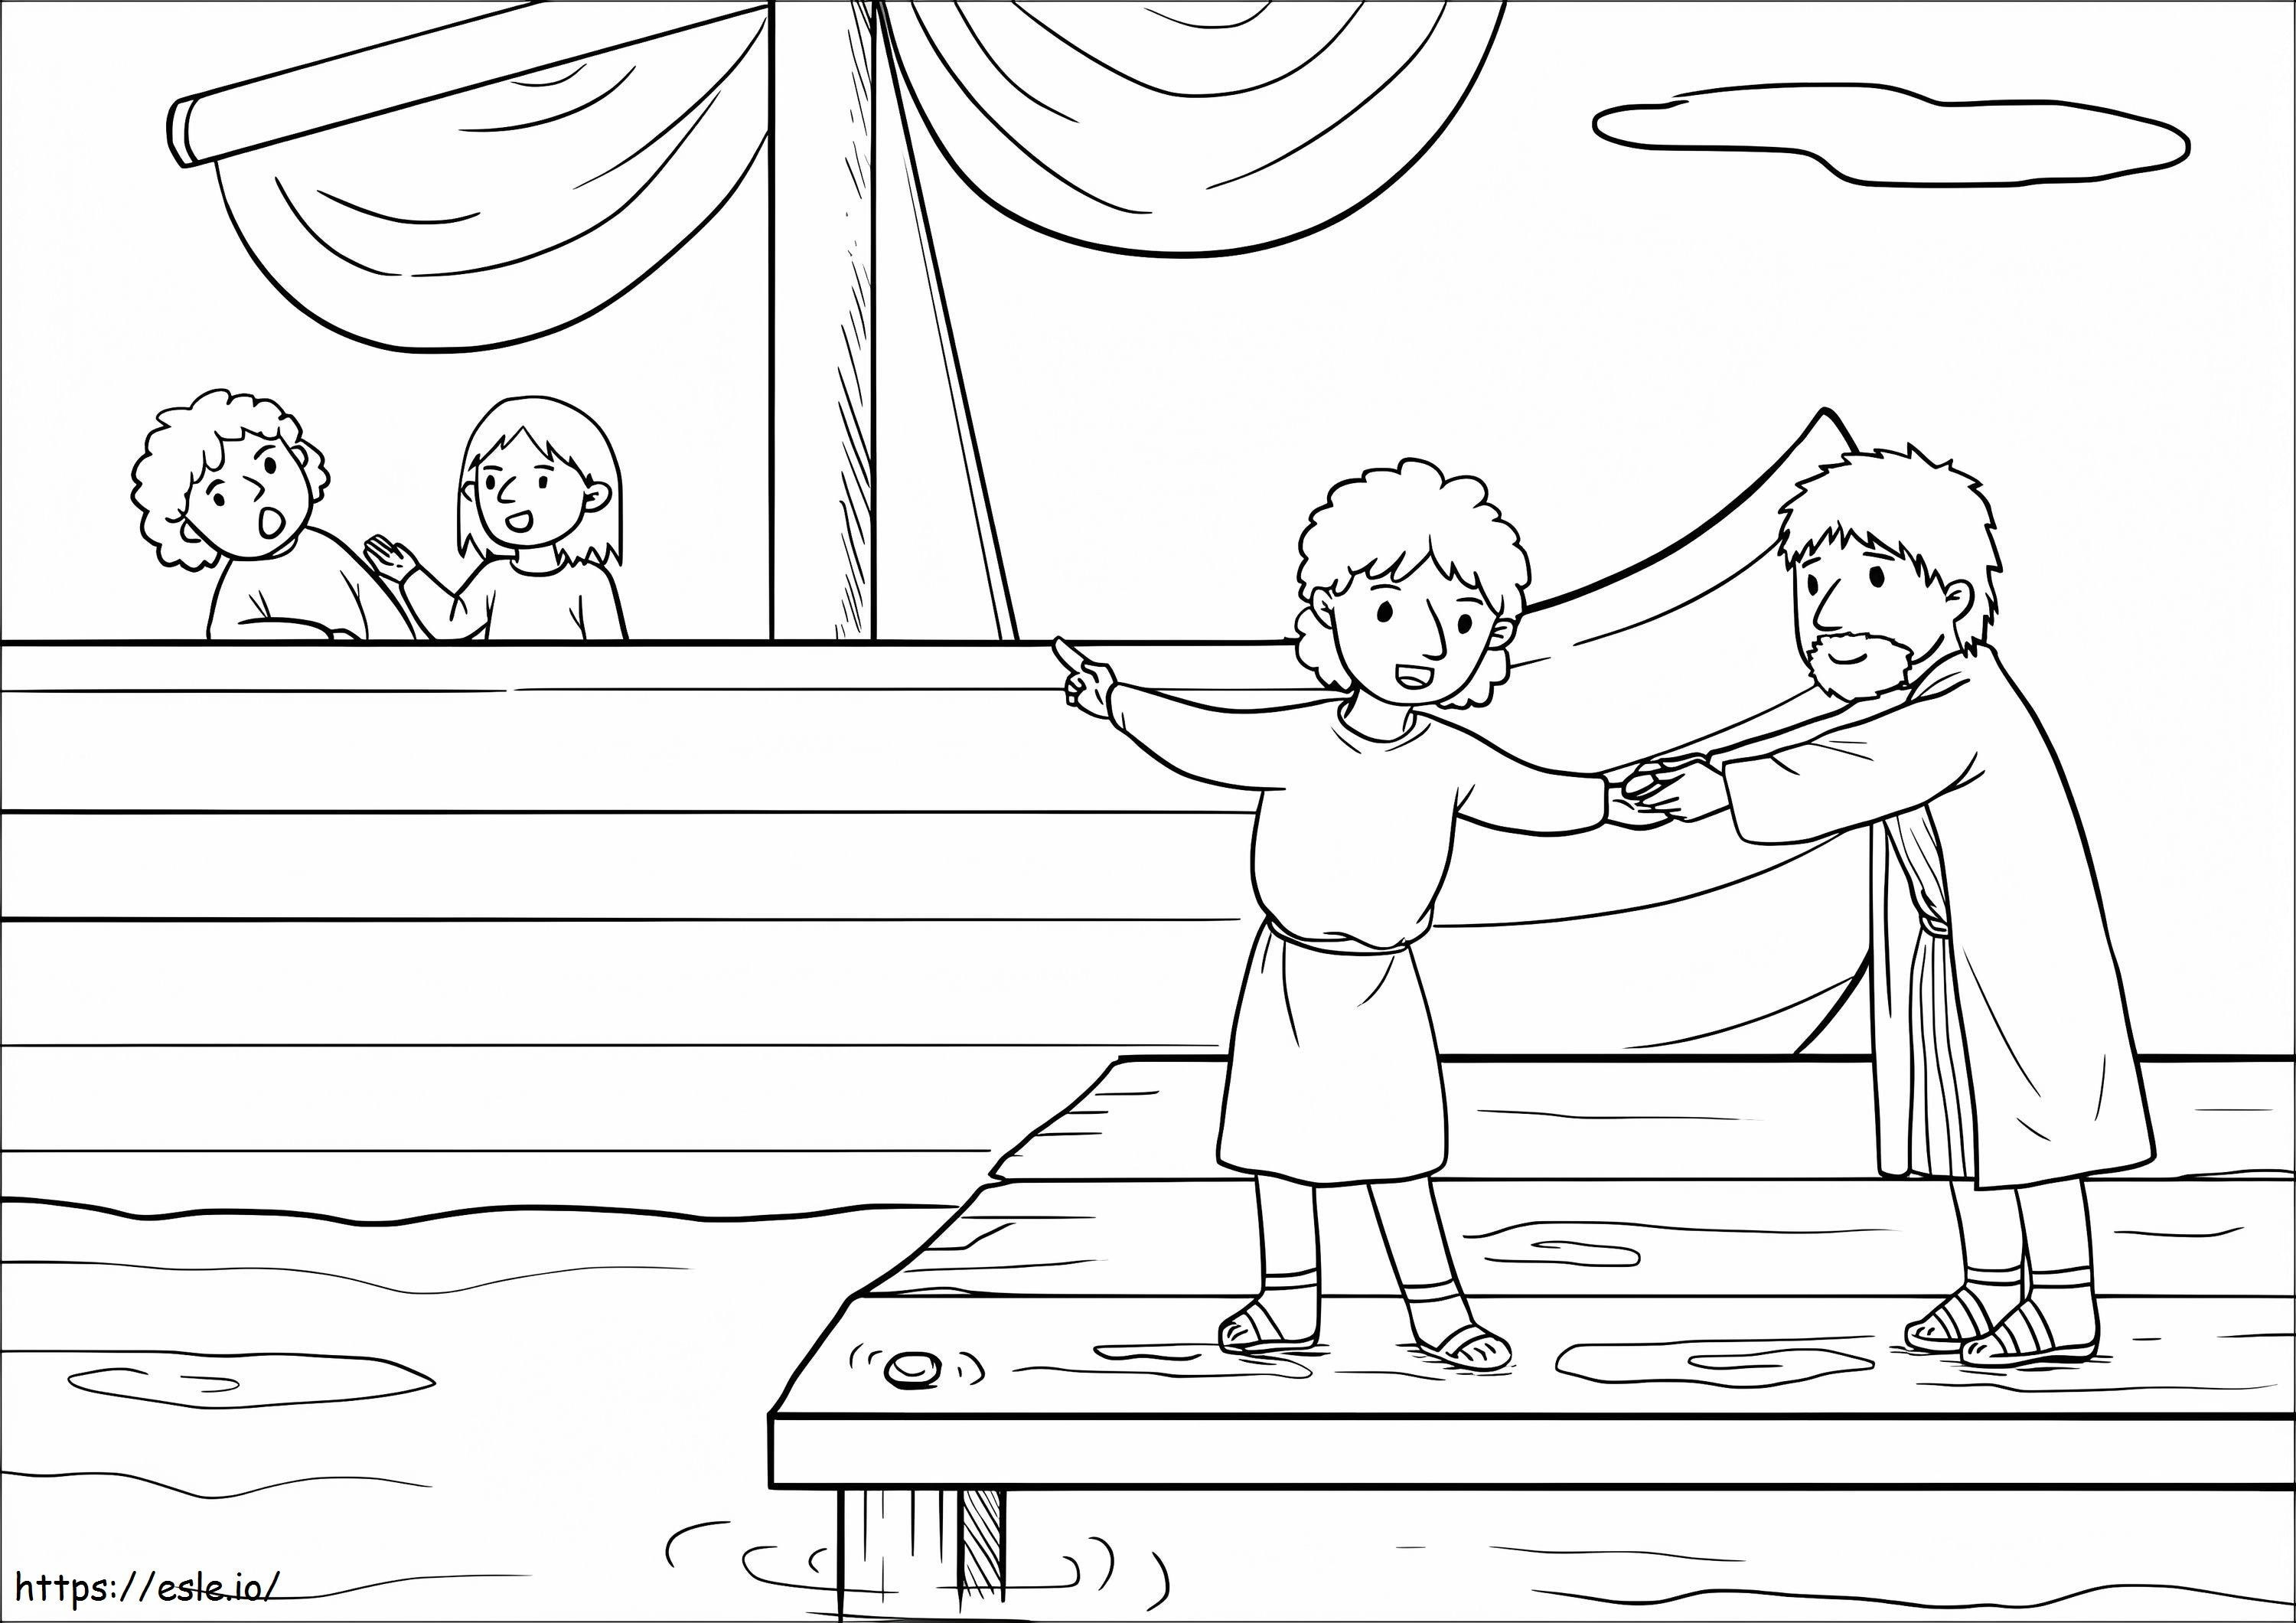 Jonah Went Down To Joppa coloring page